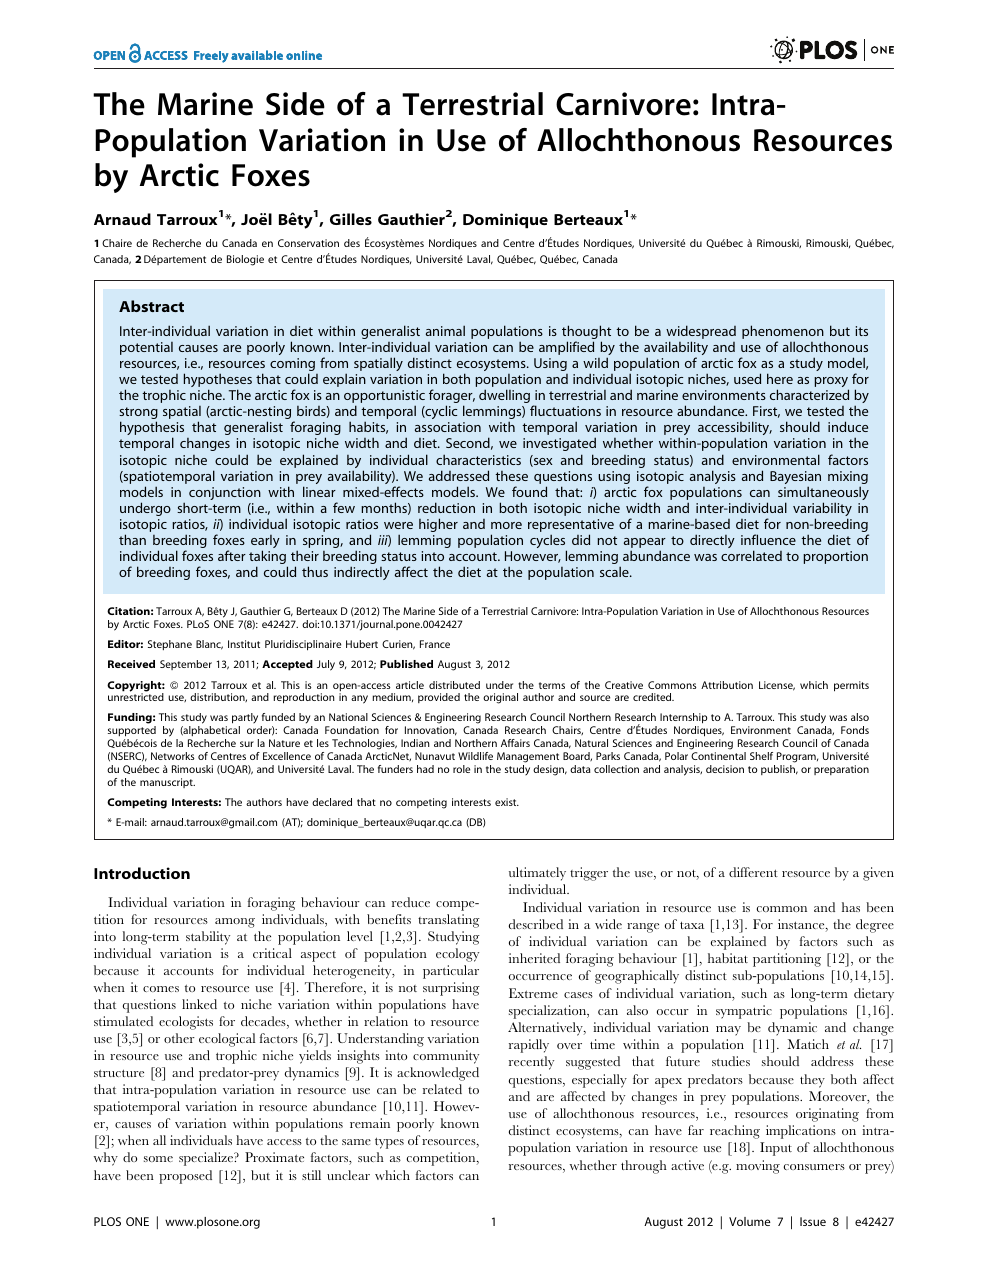 The Marine Side Of A Terrestrial Carnivore Intra Population Variation In Use Of Allochthonous Resources By Arctic Foxes Topic Of Research Paper In Biological Sciences Download Scholarly Article Pdf And Read For